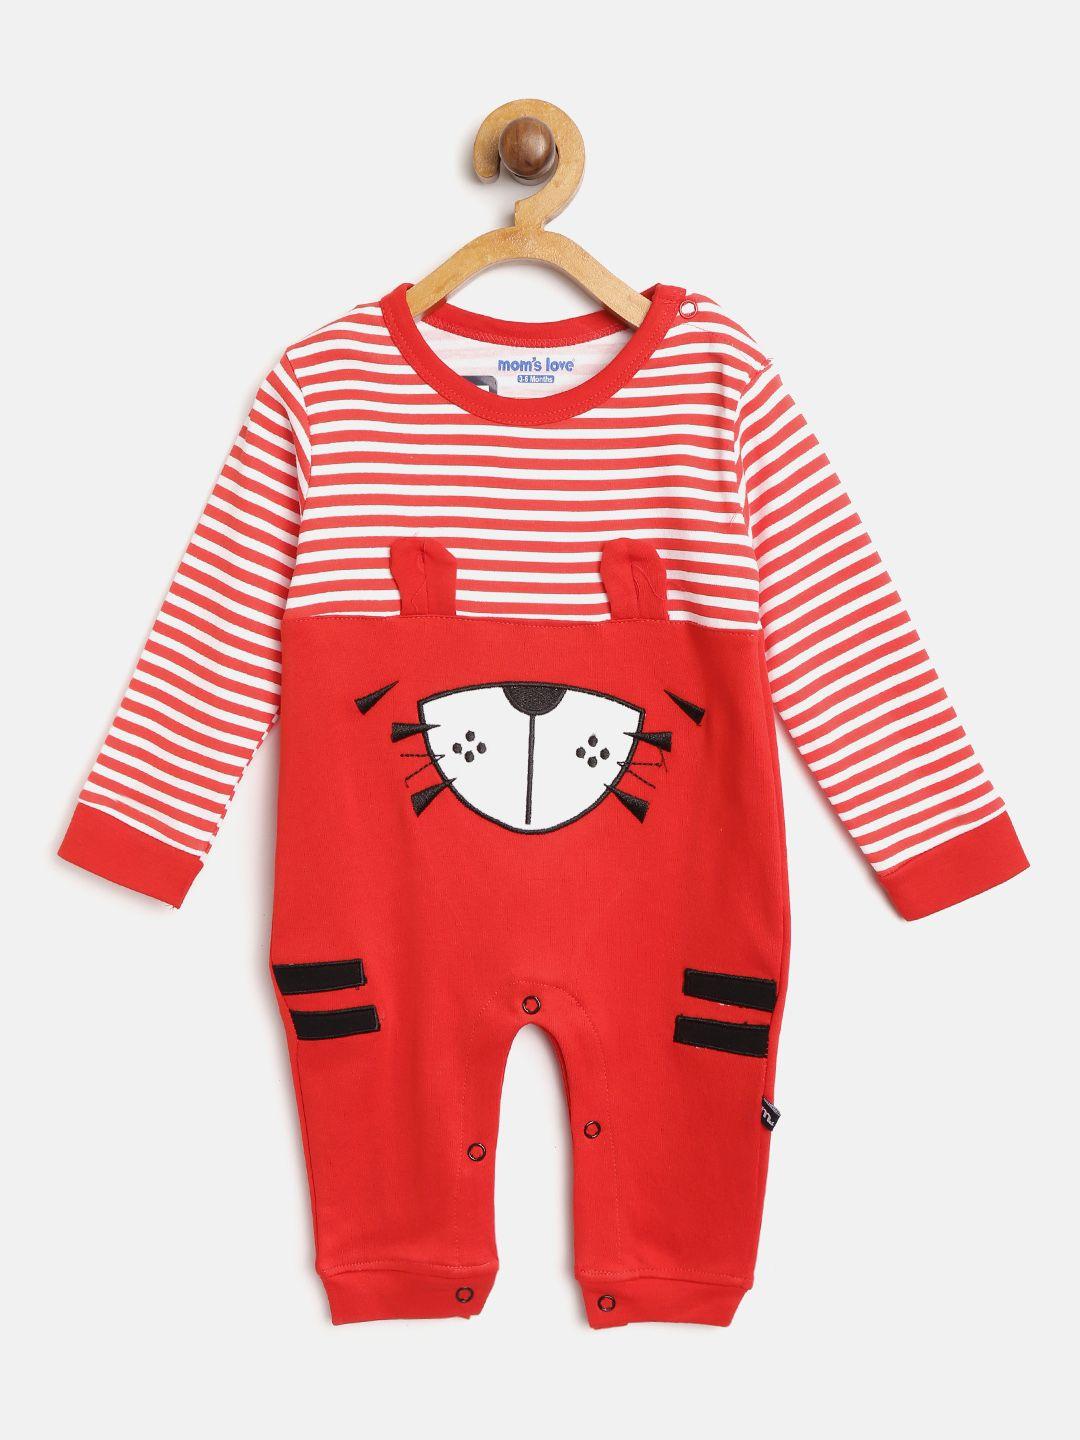 moms love boys red & white striped rompers with applique detail